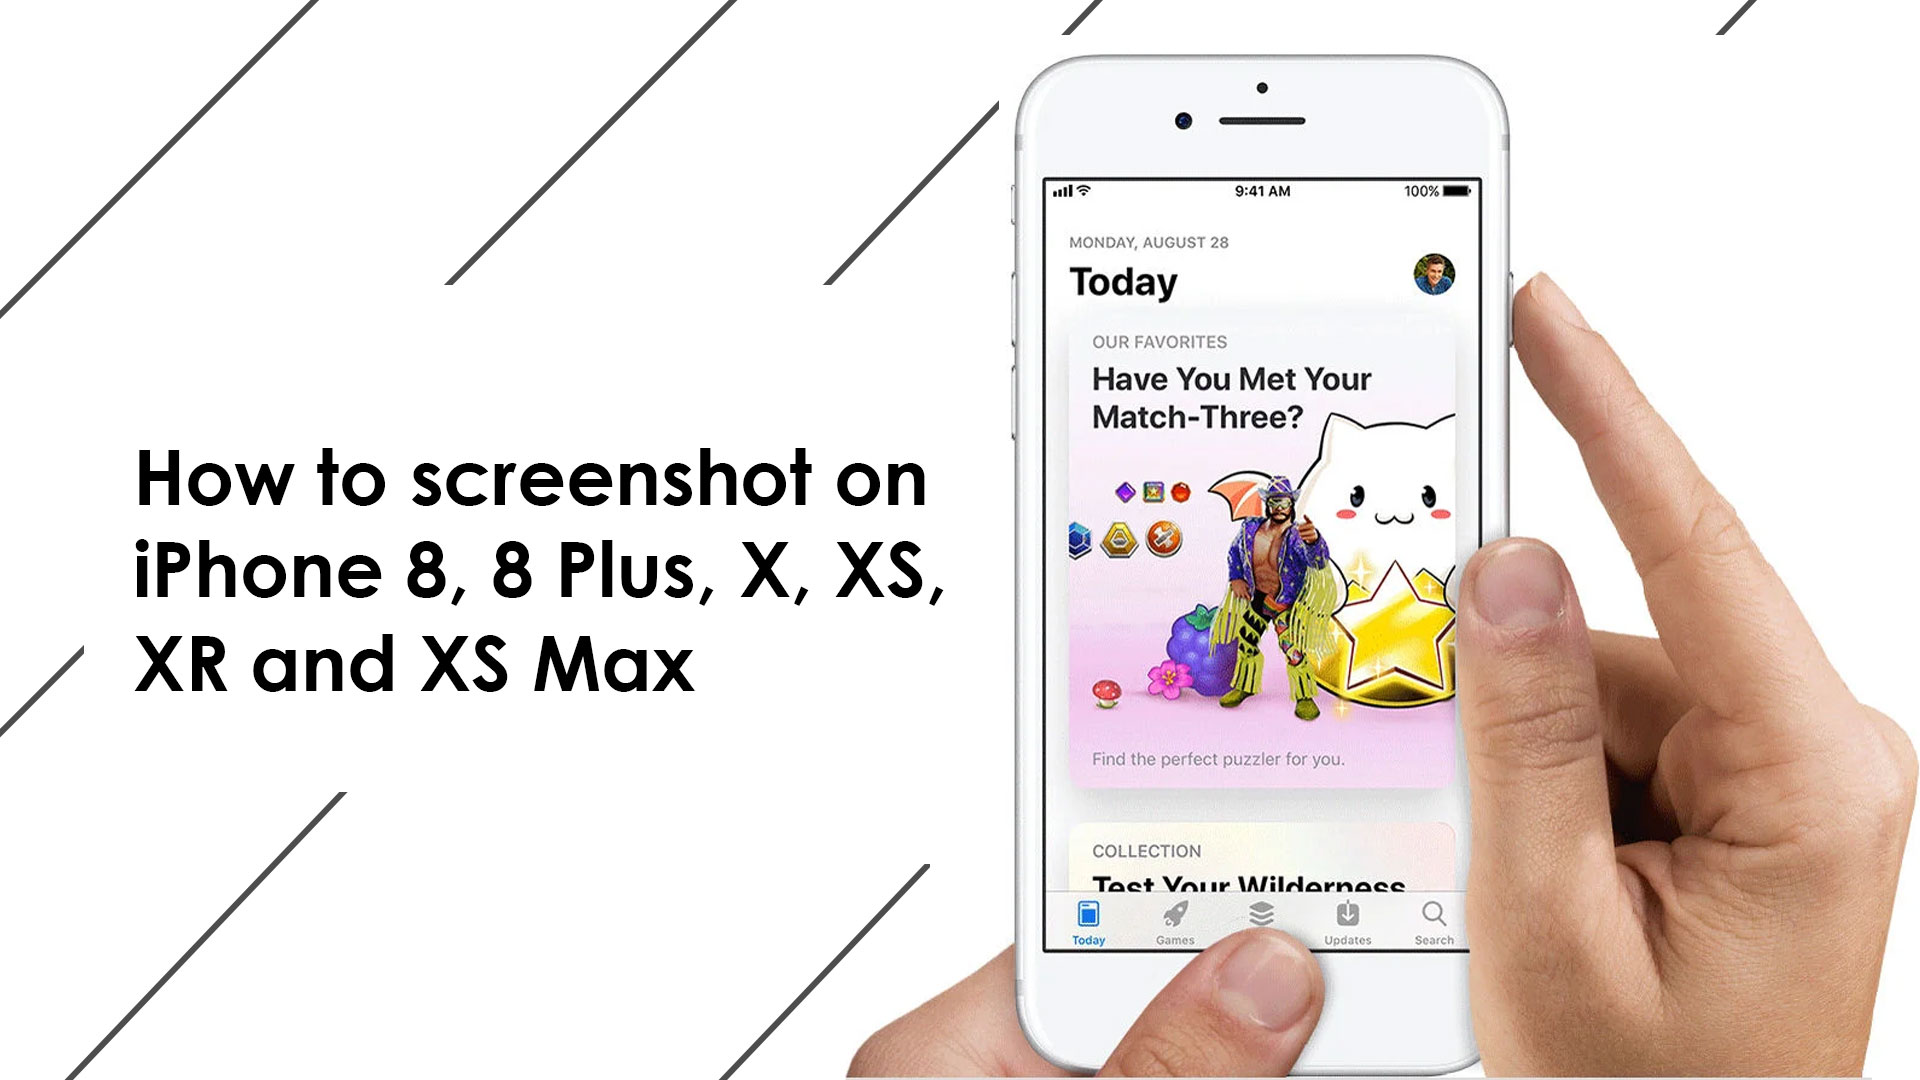 How to screenshot on iPhone 8, 8 Plus, X, XS, XR and XS Max